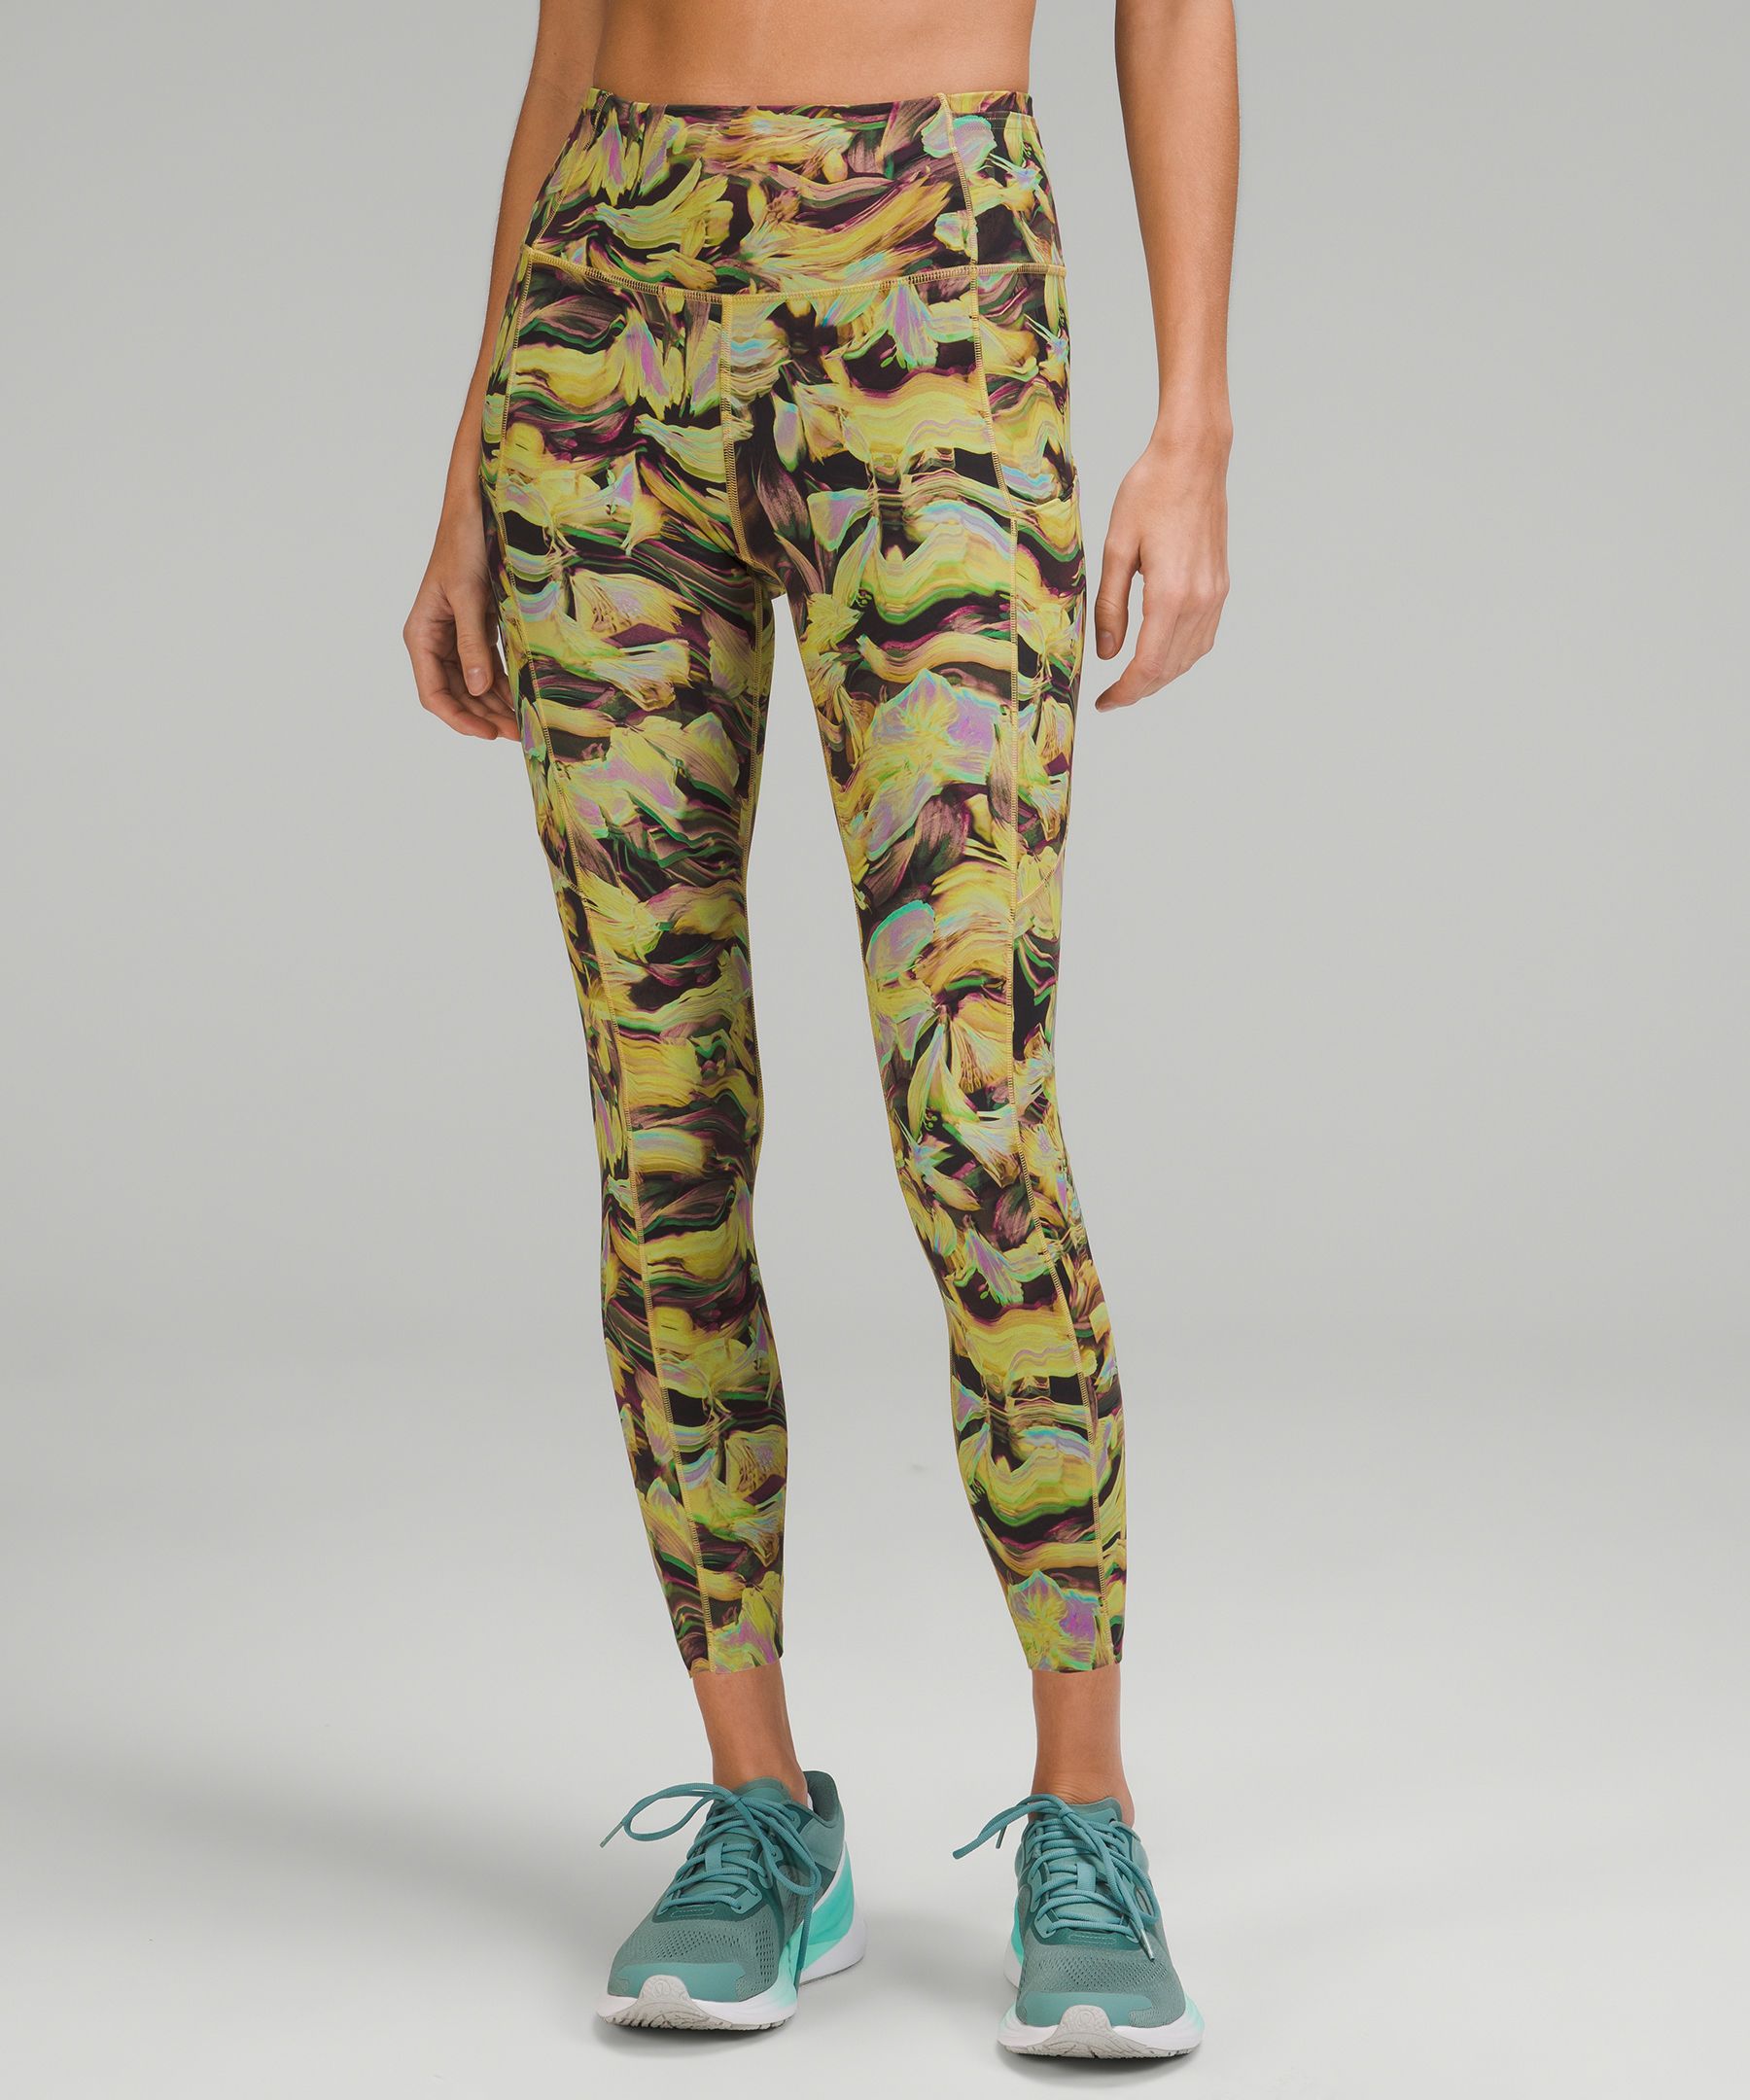 What to Match with Lululemon Camo Leggings